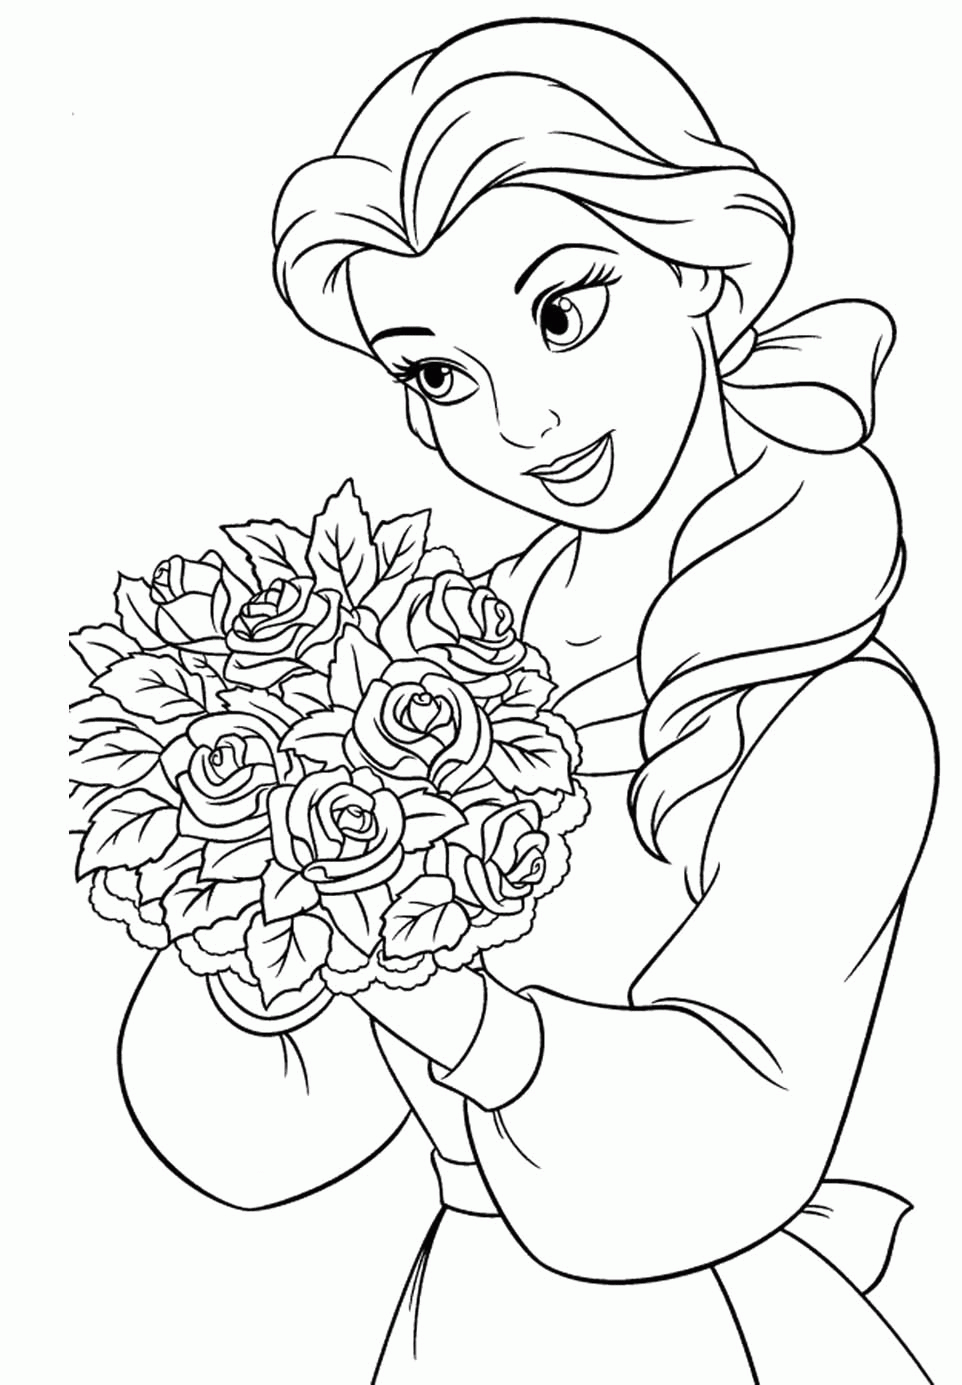 Free Printable Coloring Pages Princess Belle